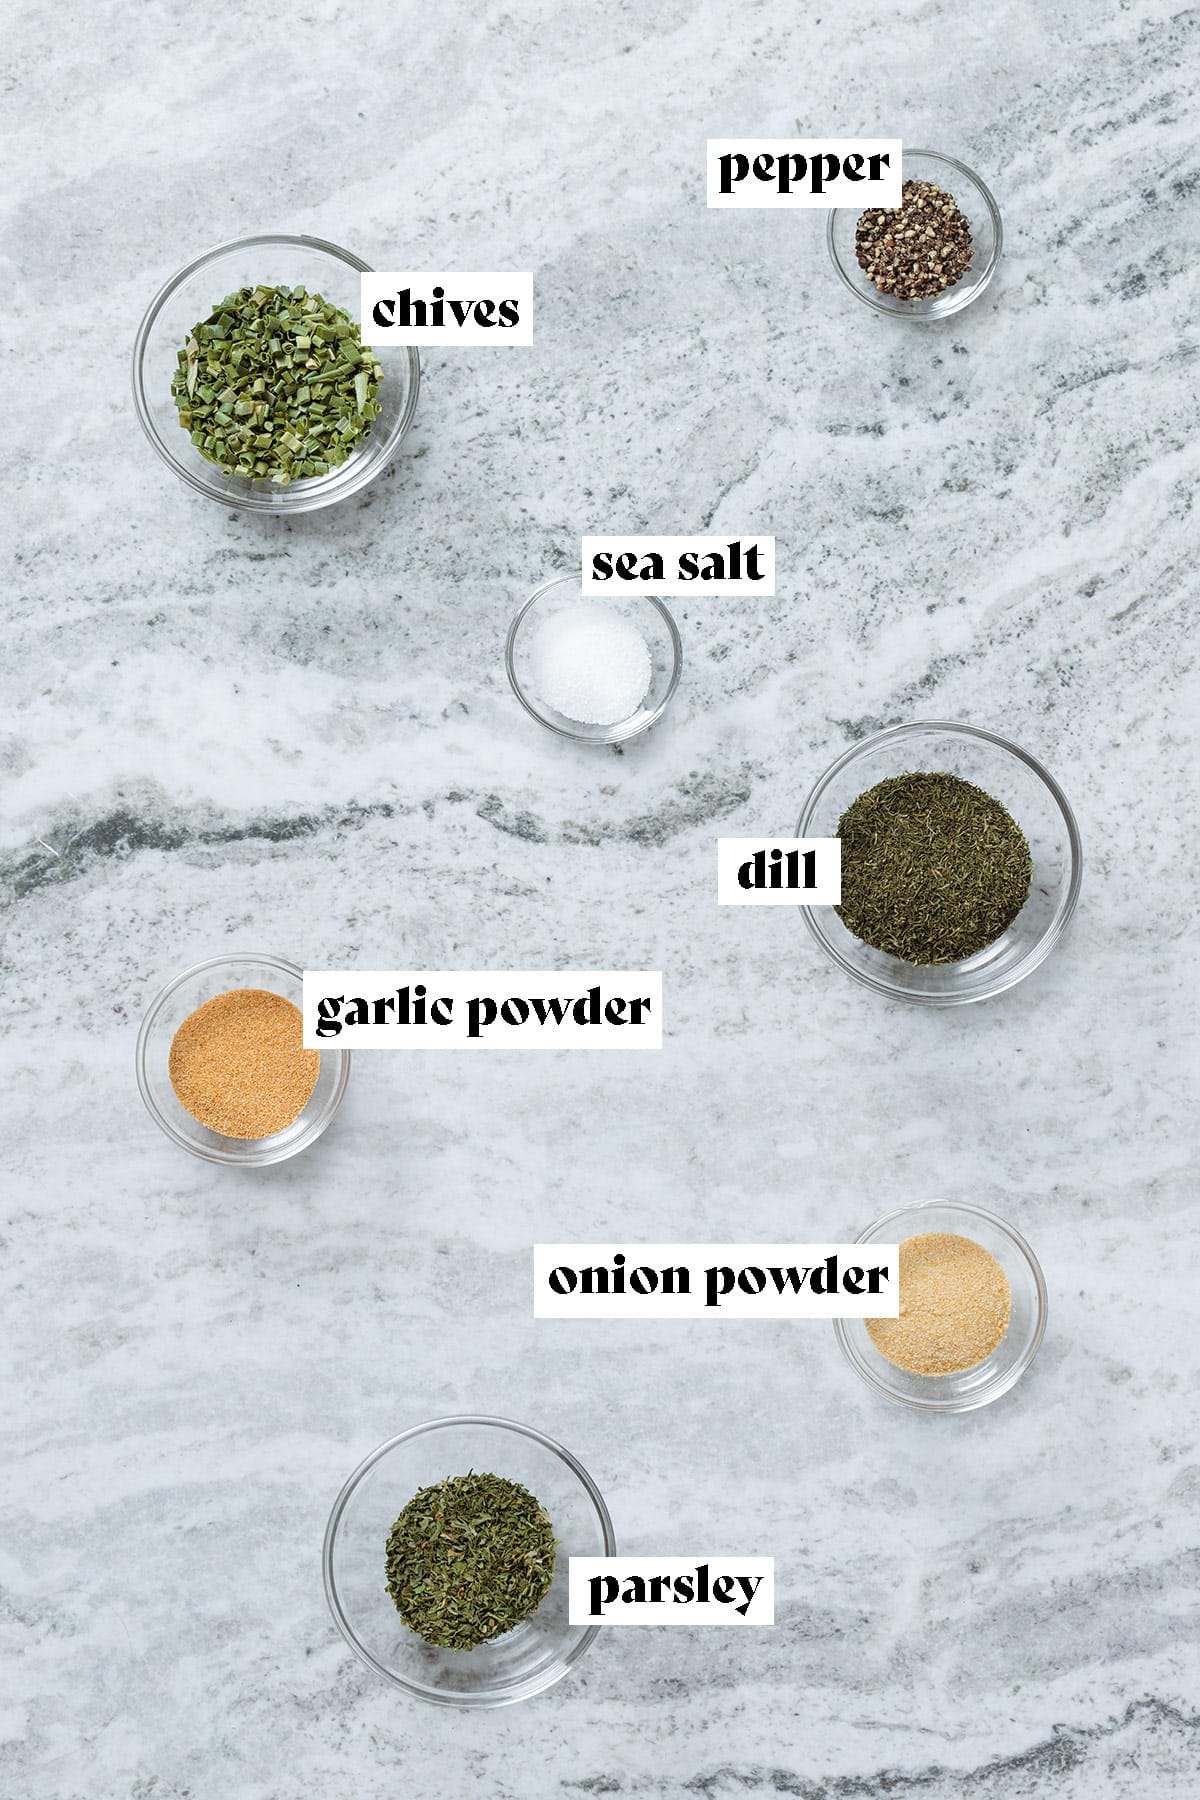 Measured out spices and dried herbs in glass bowl on a grey stone background with text overlay.